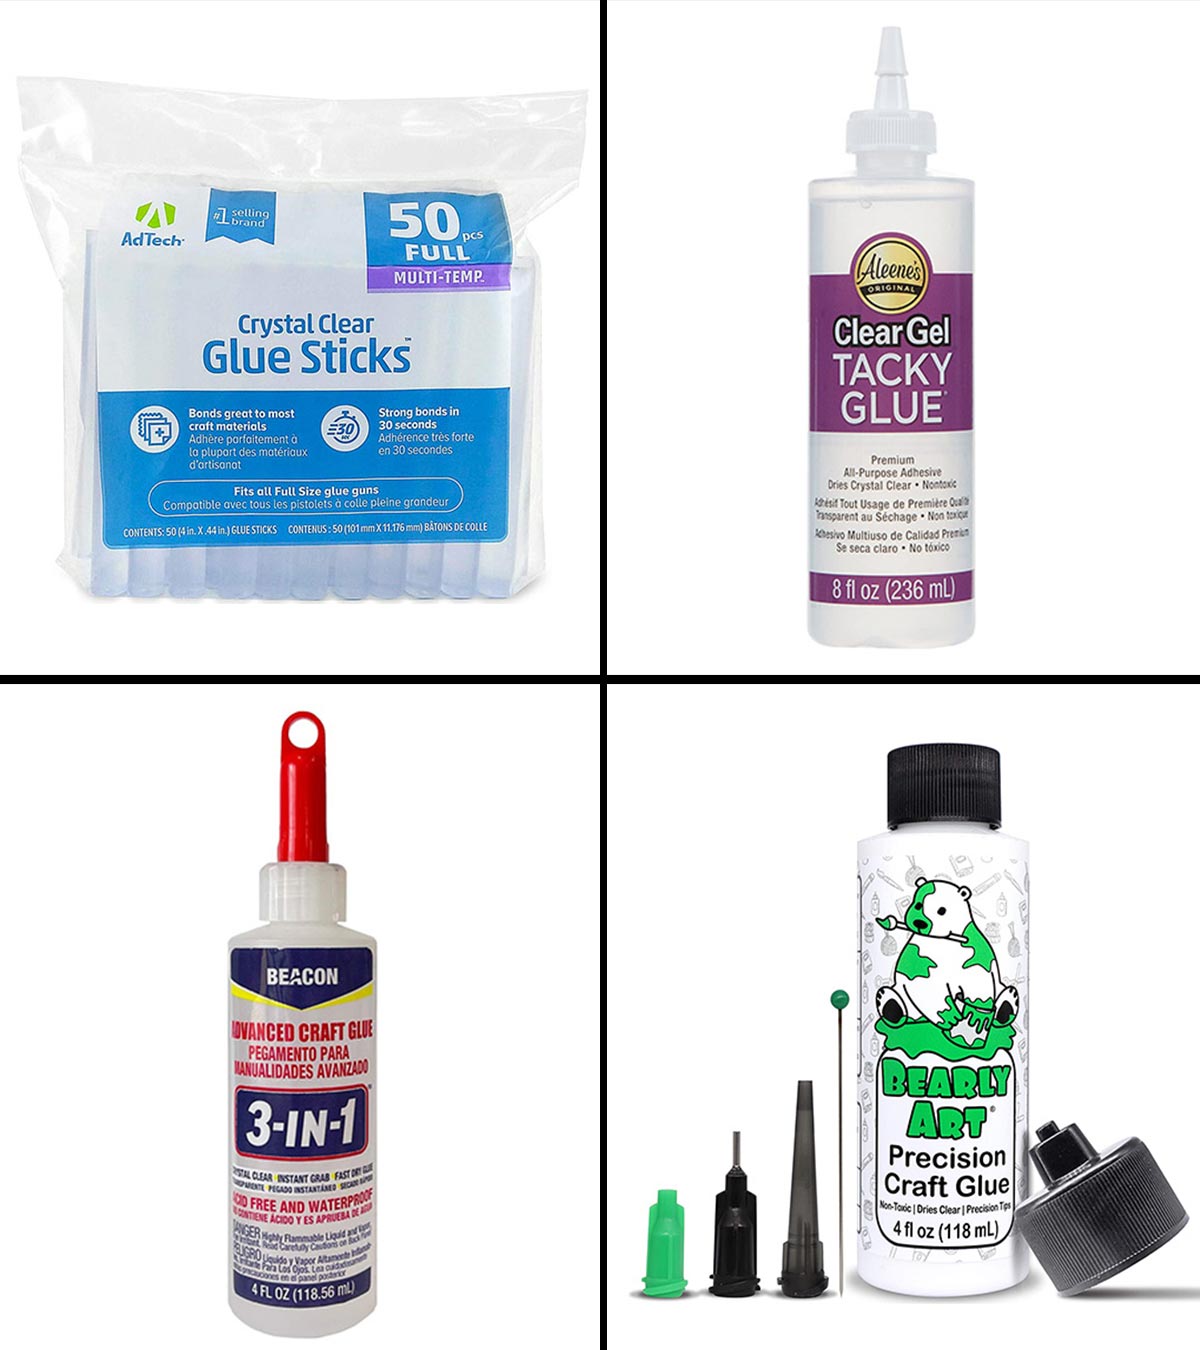 Helpful Tips for using Clear Gel Tacky Glue! 